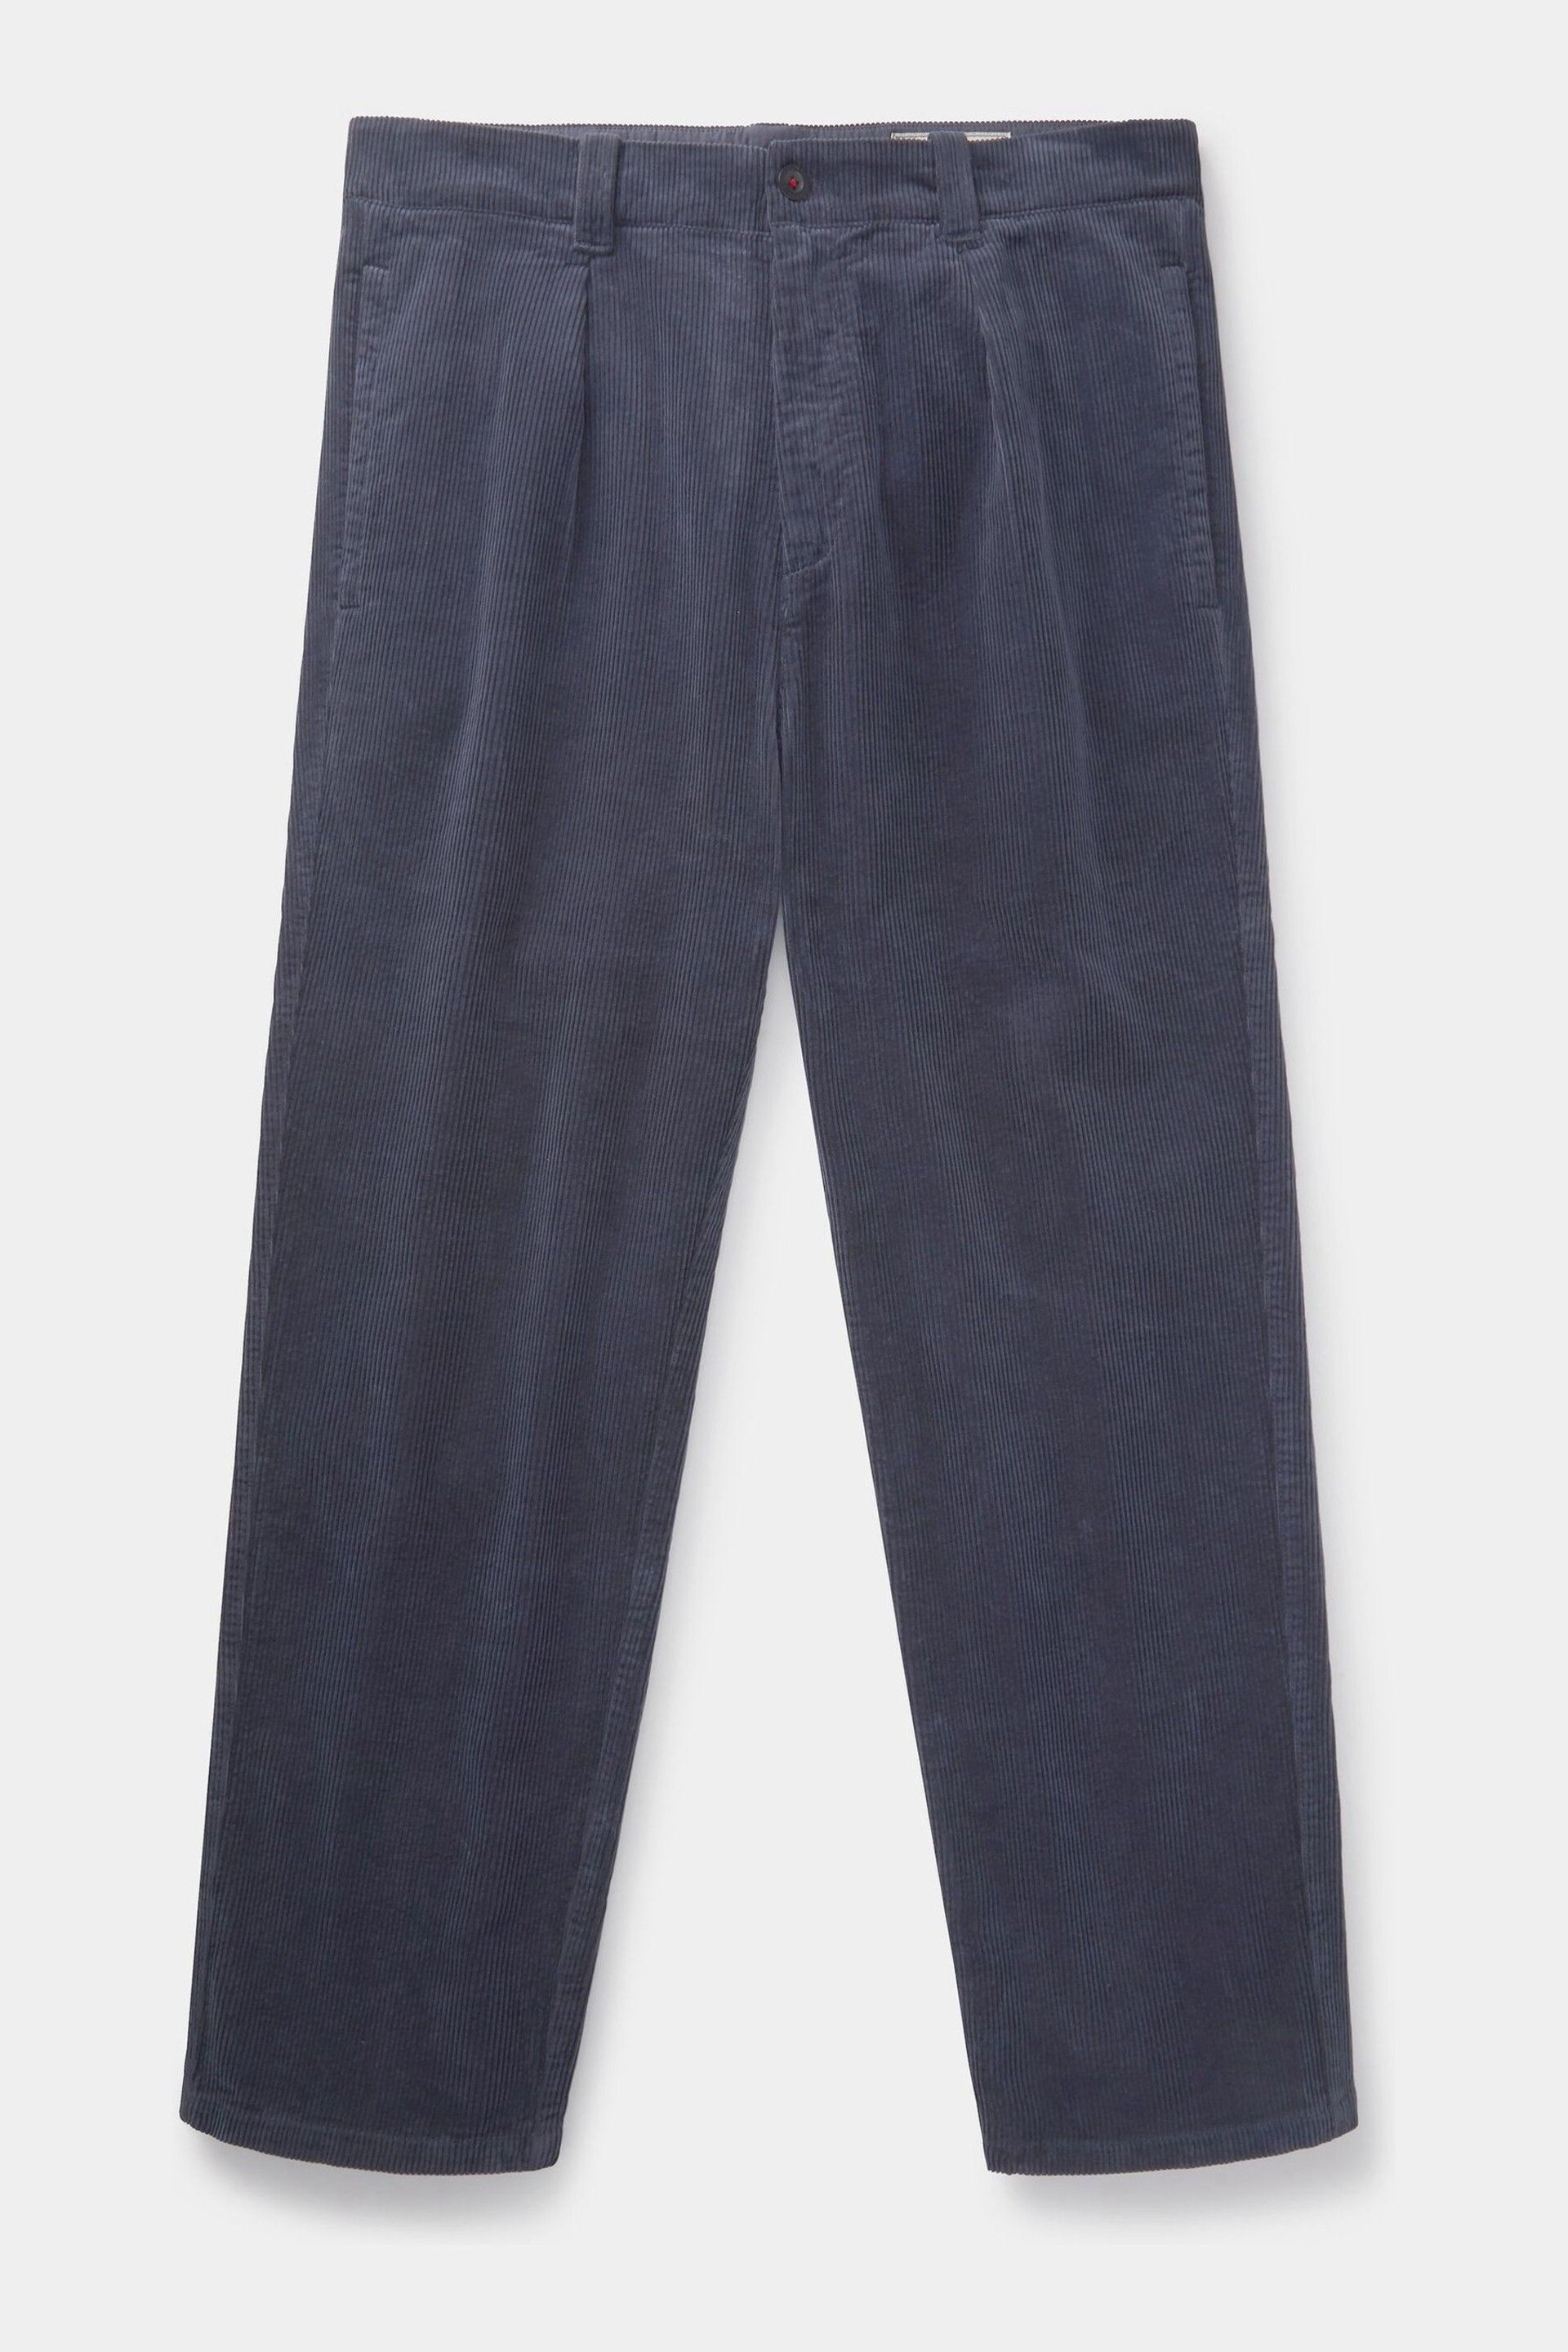 Aubin Barrowby Cord Trousers - Image 5 of 6